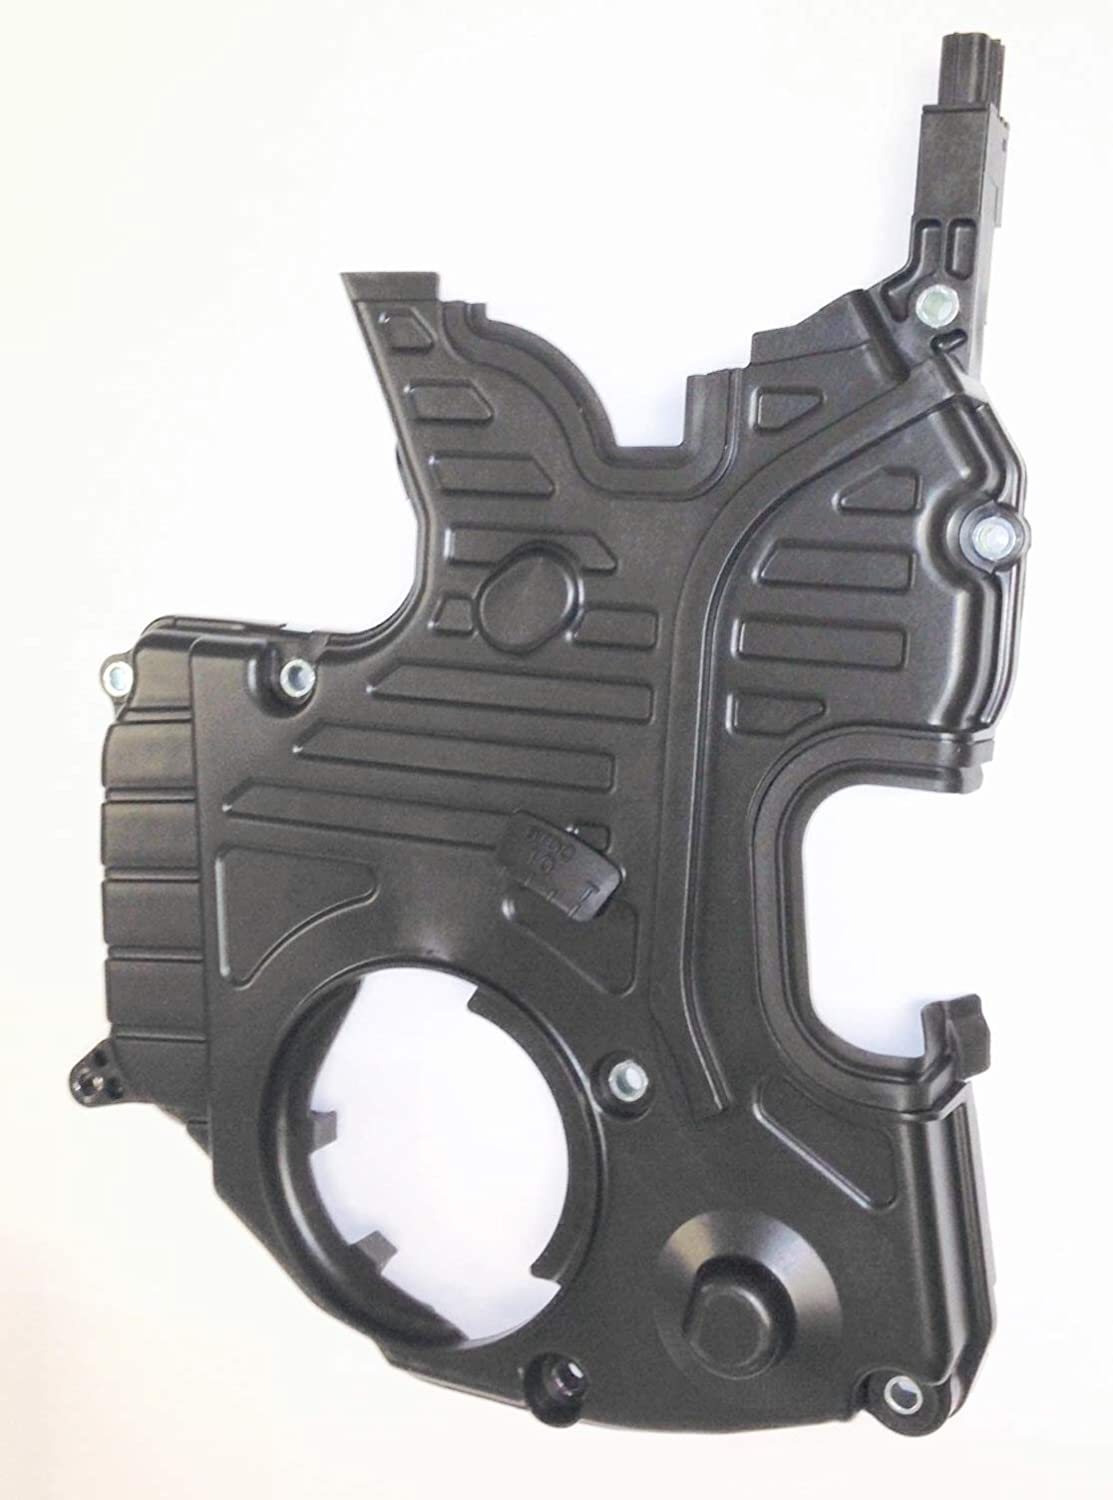 Genuine Mitsubishi Timing Belt Cover Lower MN158387 2.4L Engine Galant 2004 2005 2006 2007 2008 2009 2010 2011 2012 Eclipse 2006 2007 2008 2009 2010 2011 2012